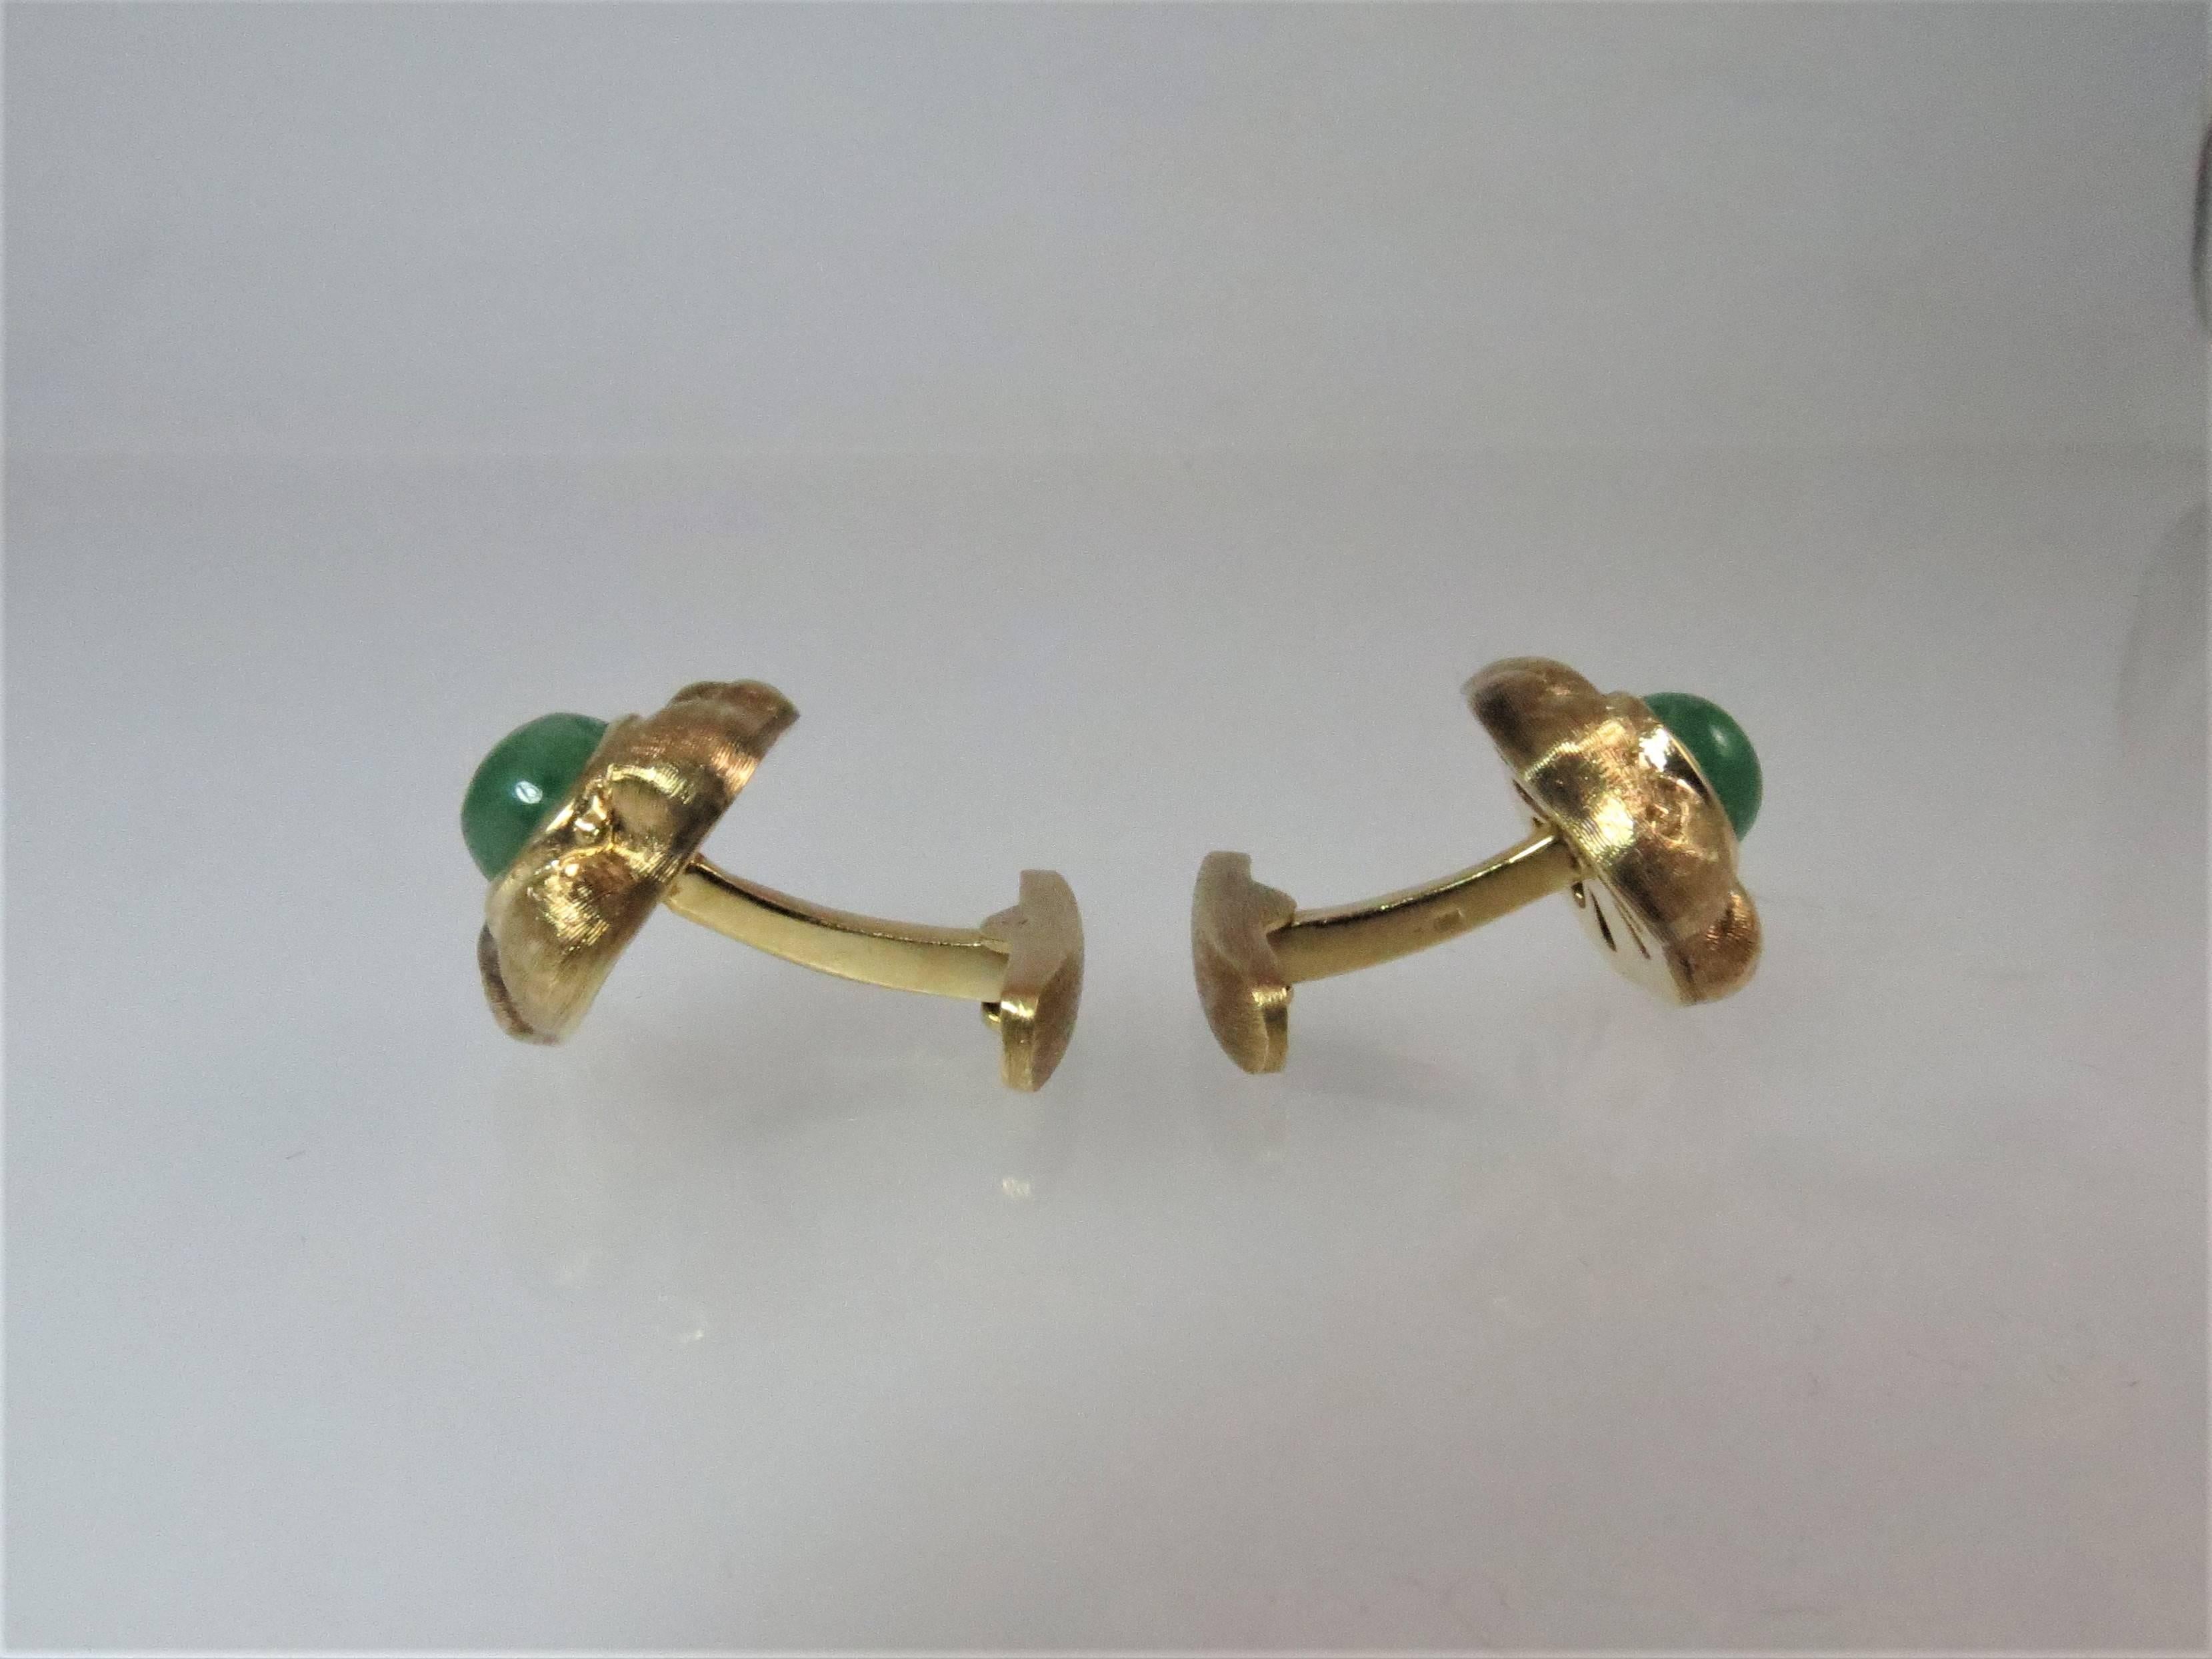 18K yellow gold cufflinks, florentine finish,  bezel set with two cabochon emeralds measuring 9mm x 8mm